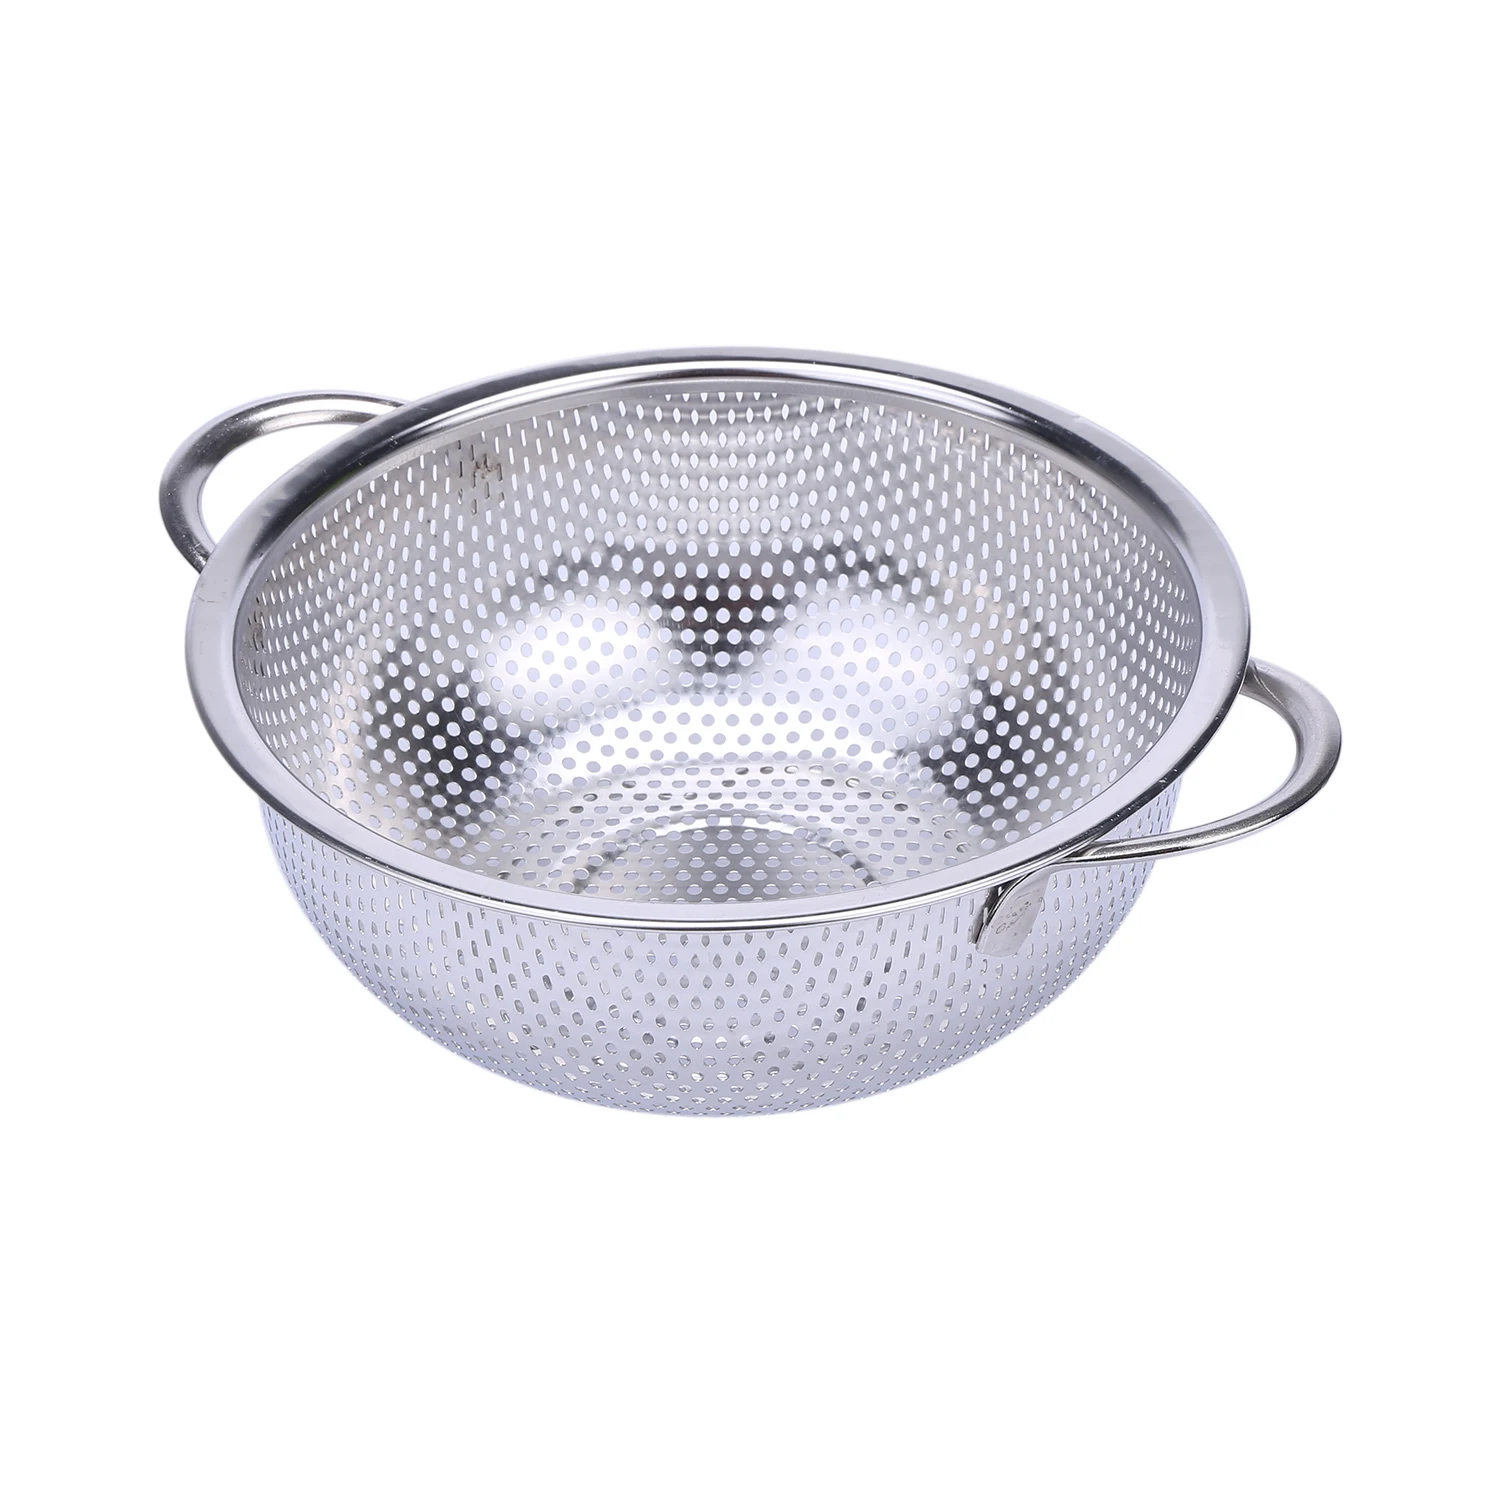 

Stainless Steel Colanders With Handle,Colander Perforated Strainer For Kitchen Pasta/Vegetable/Rice/Fruit/Food